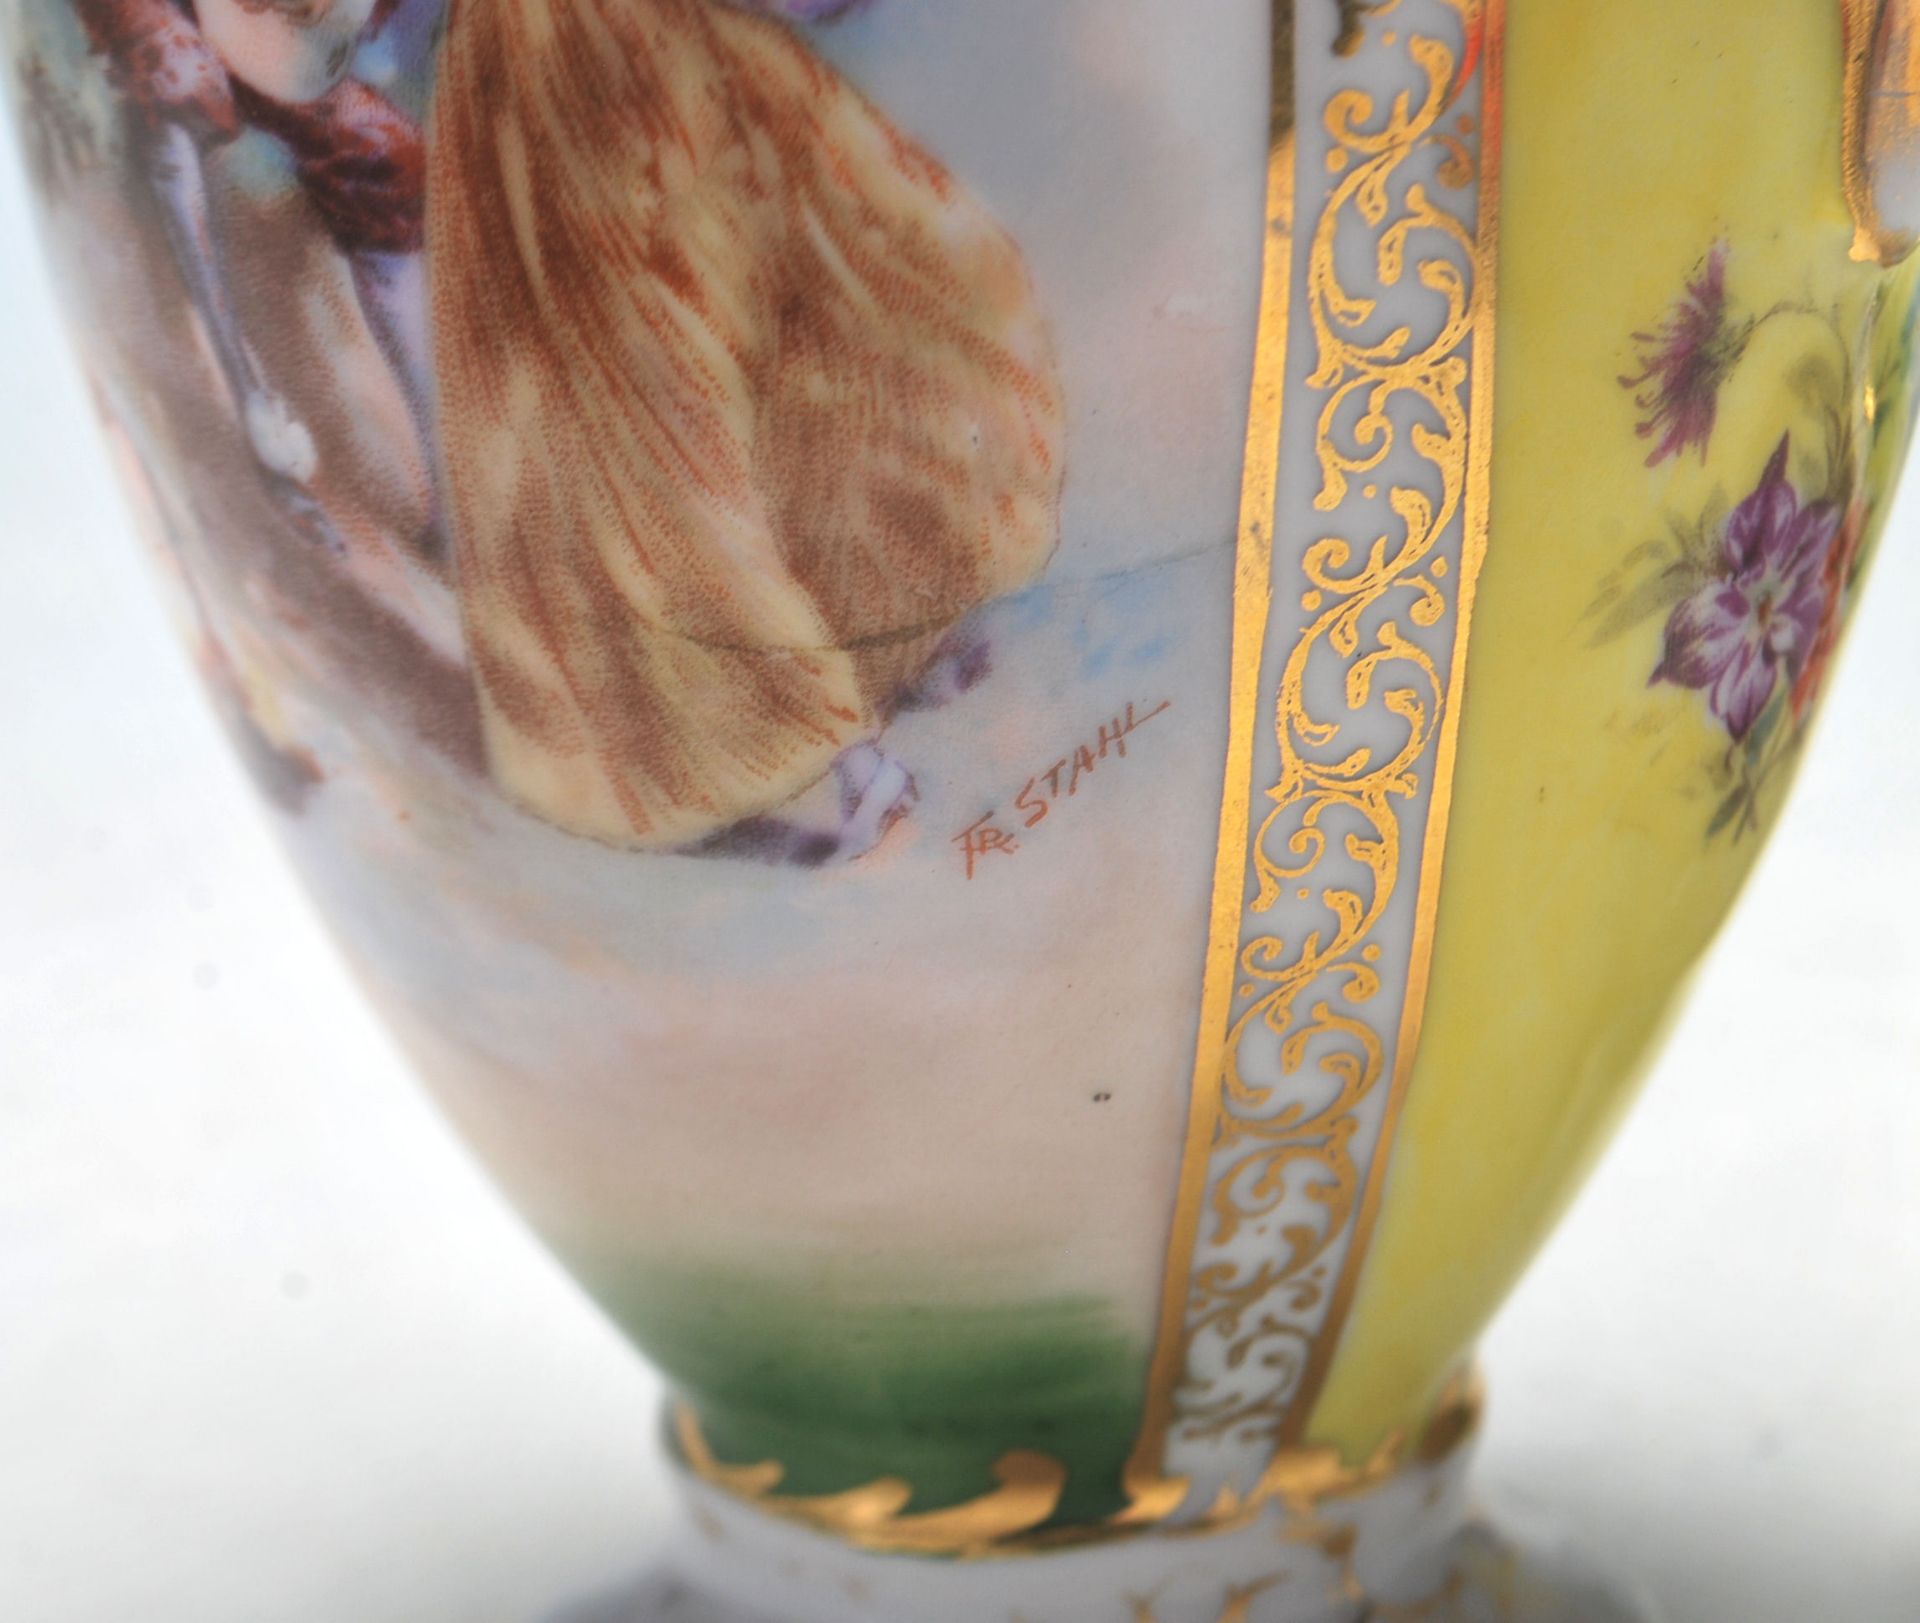 A PAIR OF GERMAN VASES BY VON SCHIERHOLZ 1900C - C.G. SCHIERHOLZ & SON - PAITED BY FR STAHL - Image 10 of 11